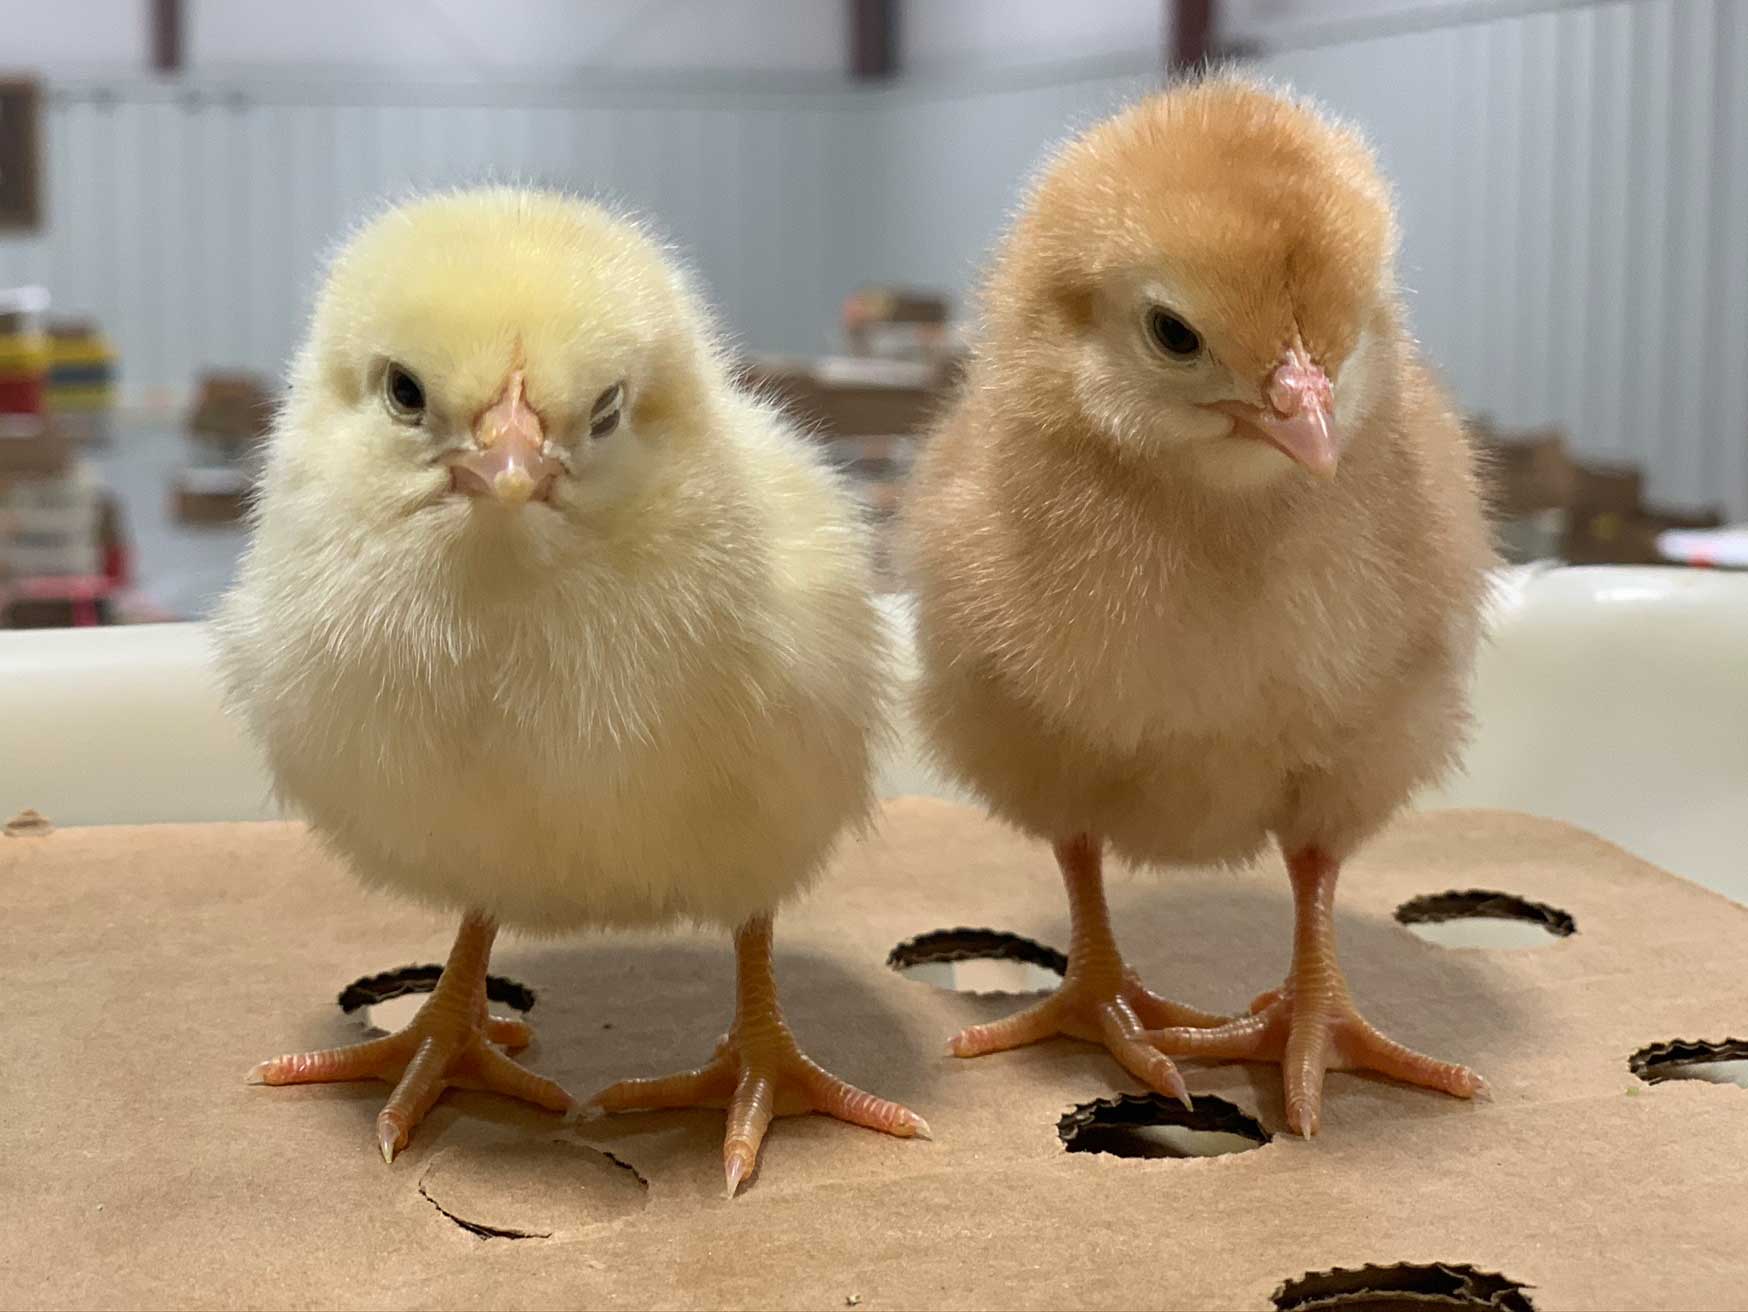 two small yellow baby chicks standing on a box